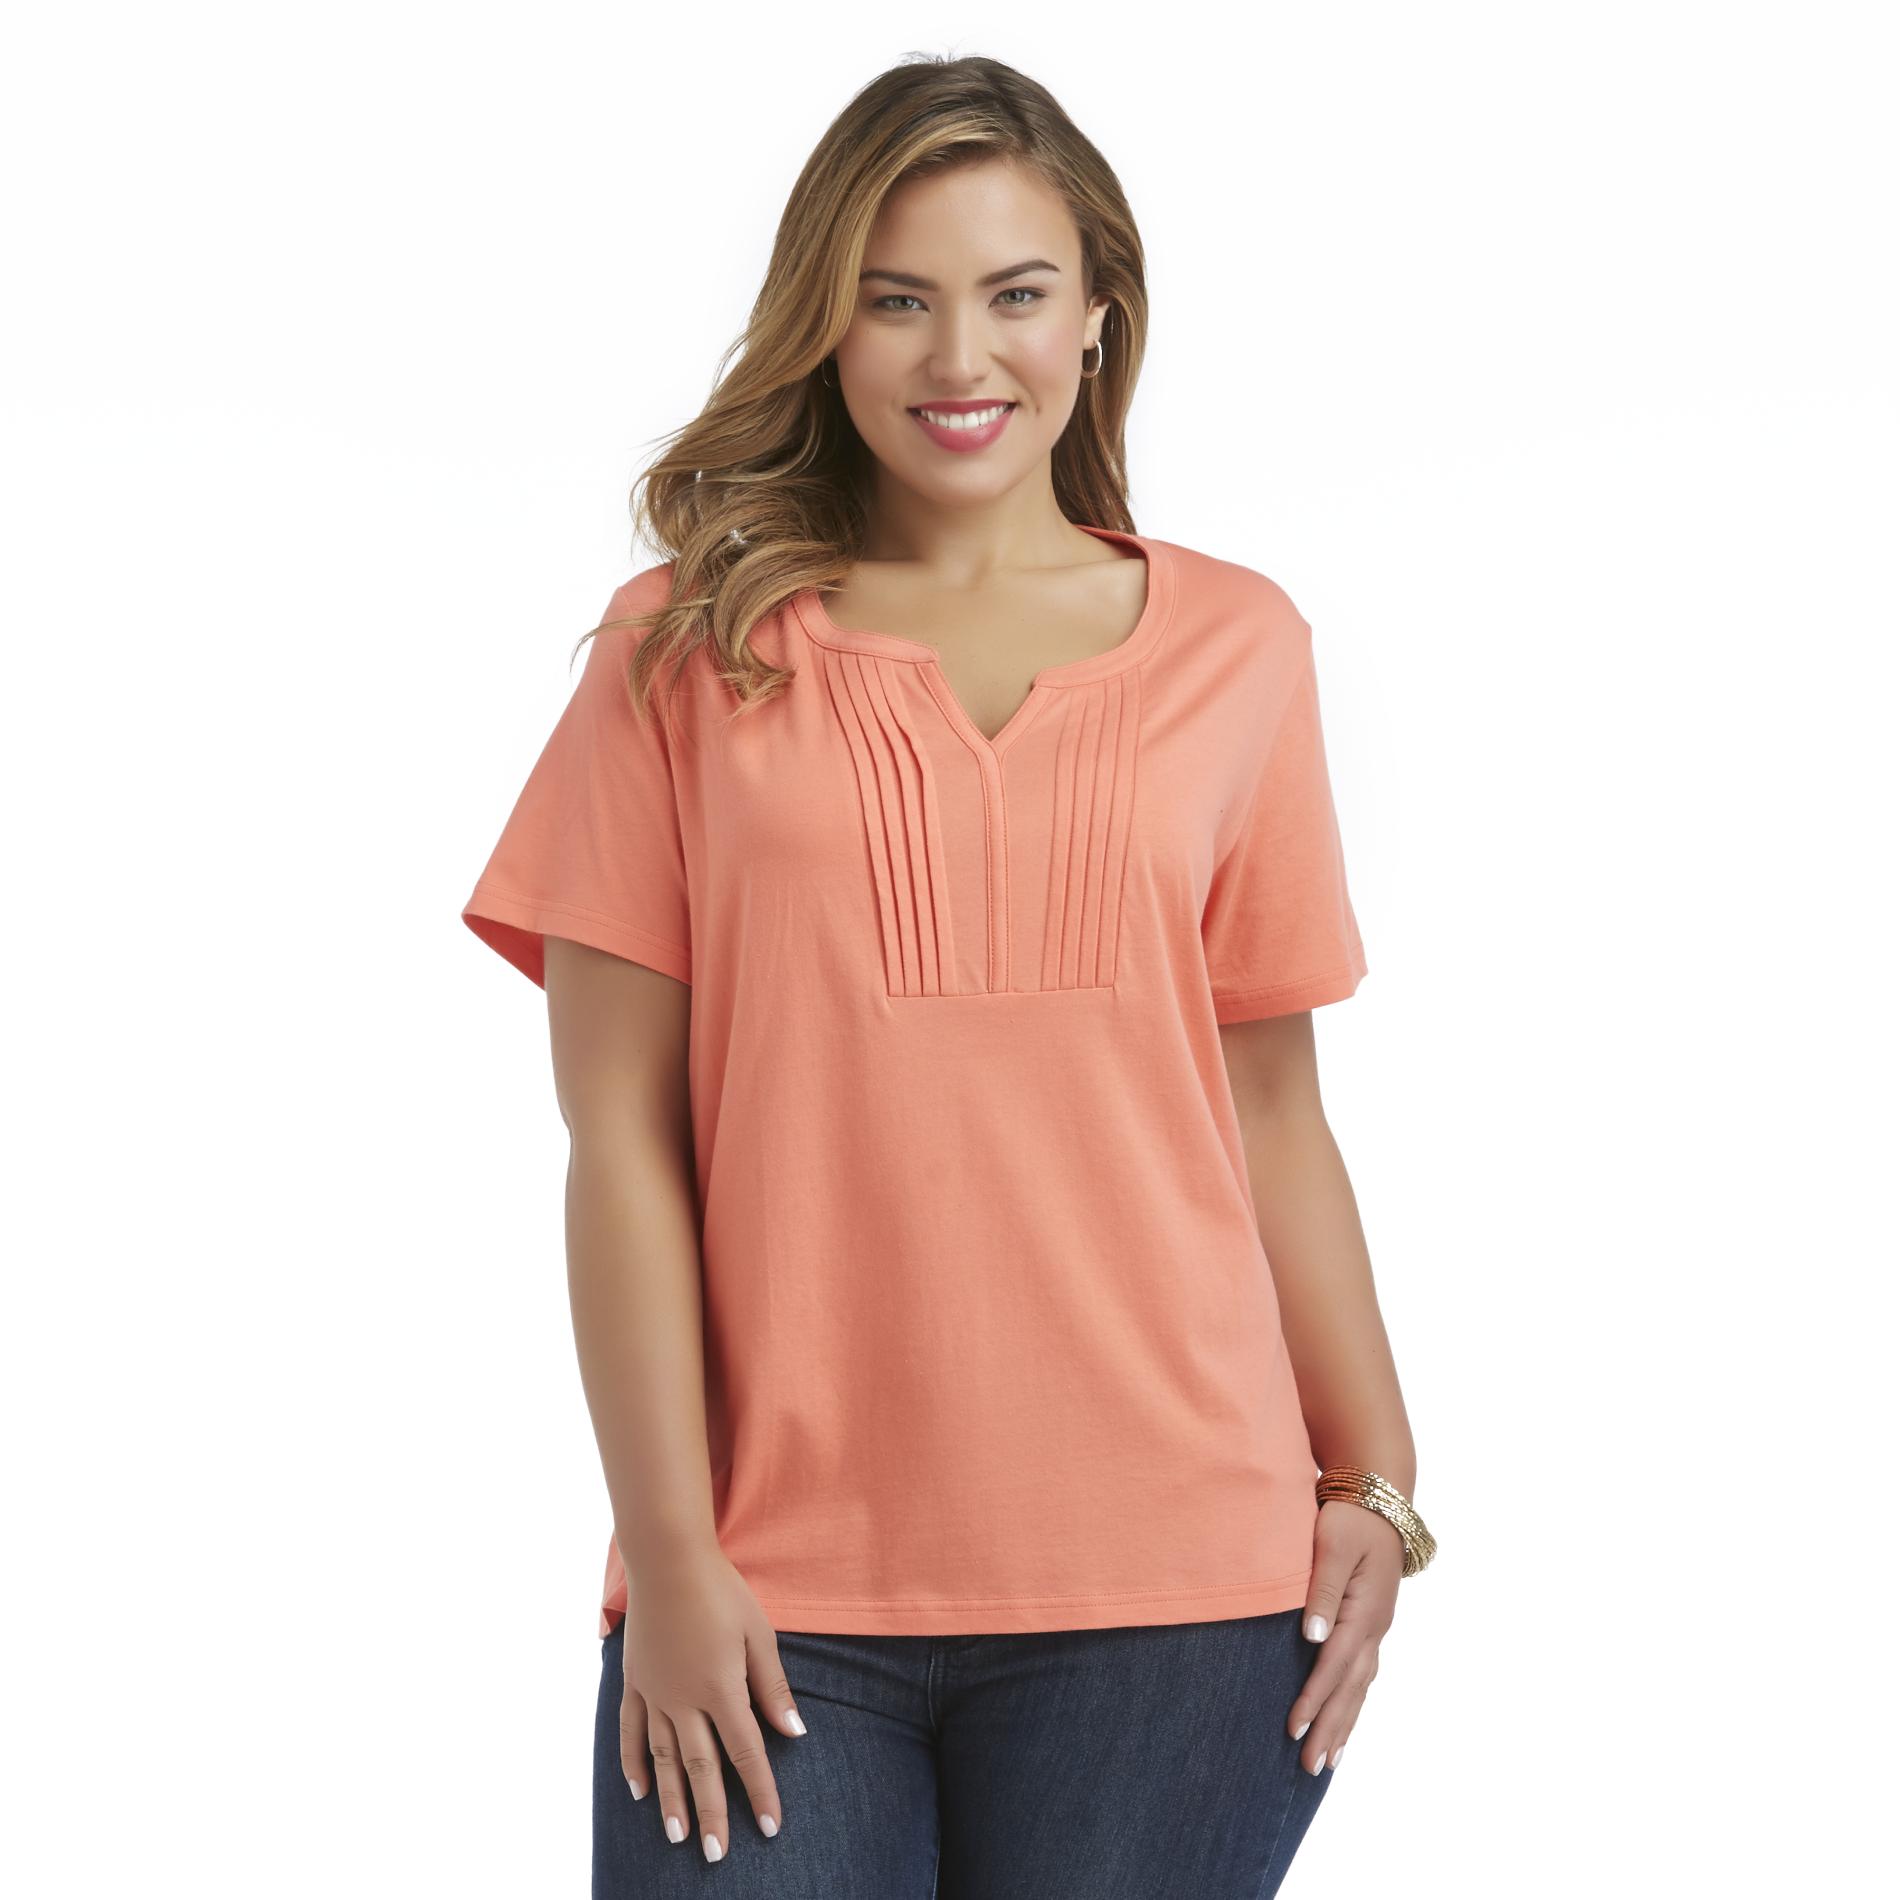 Basic Editions Women's Plus Pintucked Top